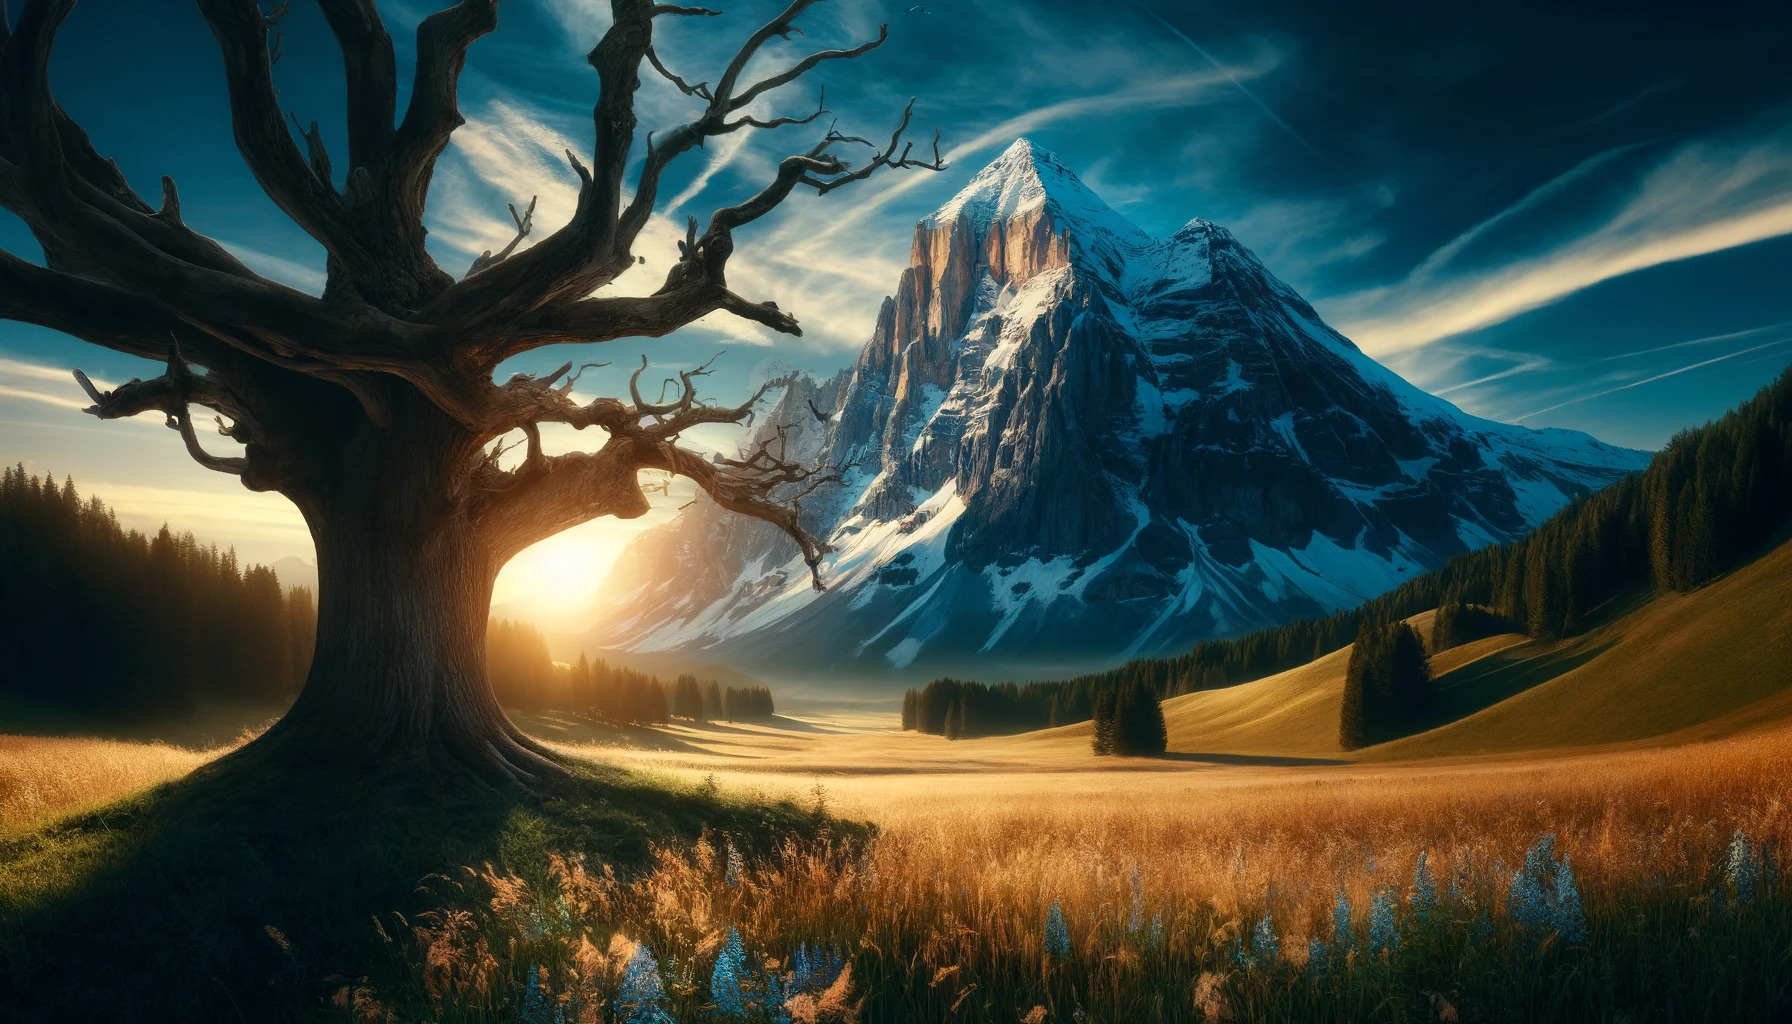 the cinematic image inspired by words that start with 'A'. The scene features a majestic alpine peak under an azure sky, an ample field with wildflowers, and an ancient tree in the foreground, all bathed in golden sunset light. (5 Letter Words Starting With A)